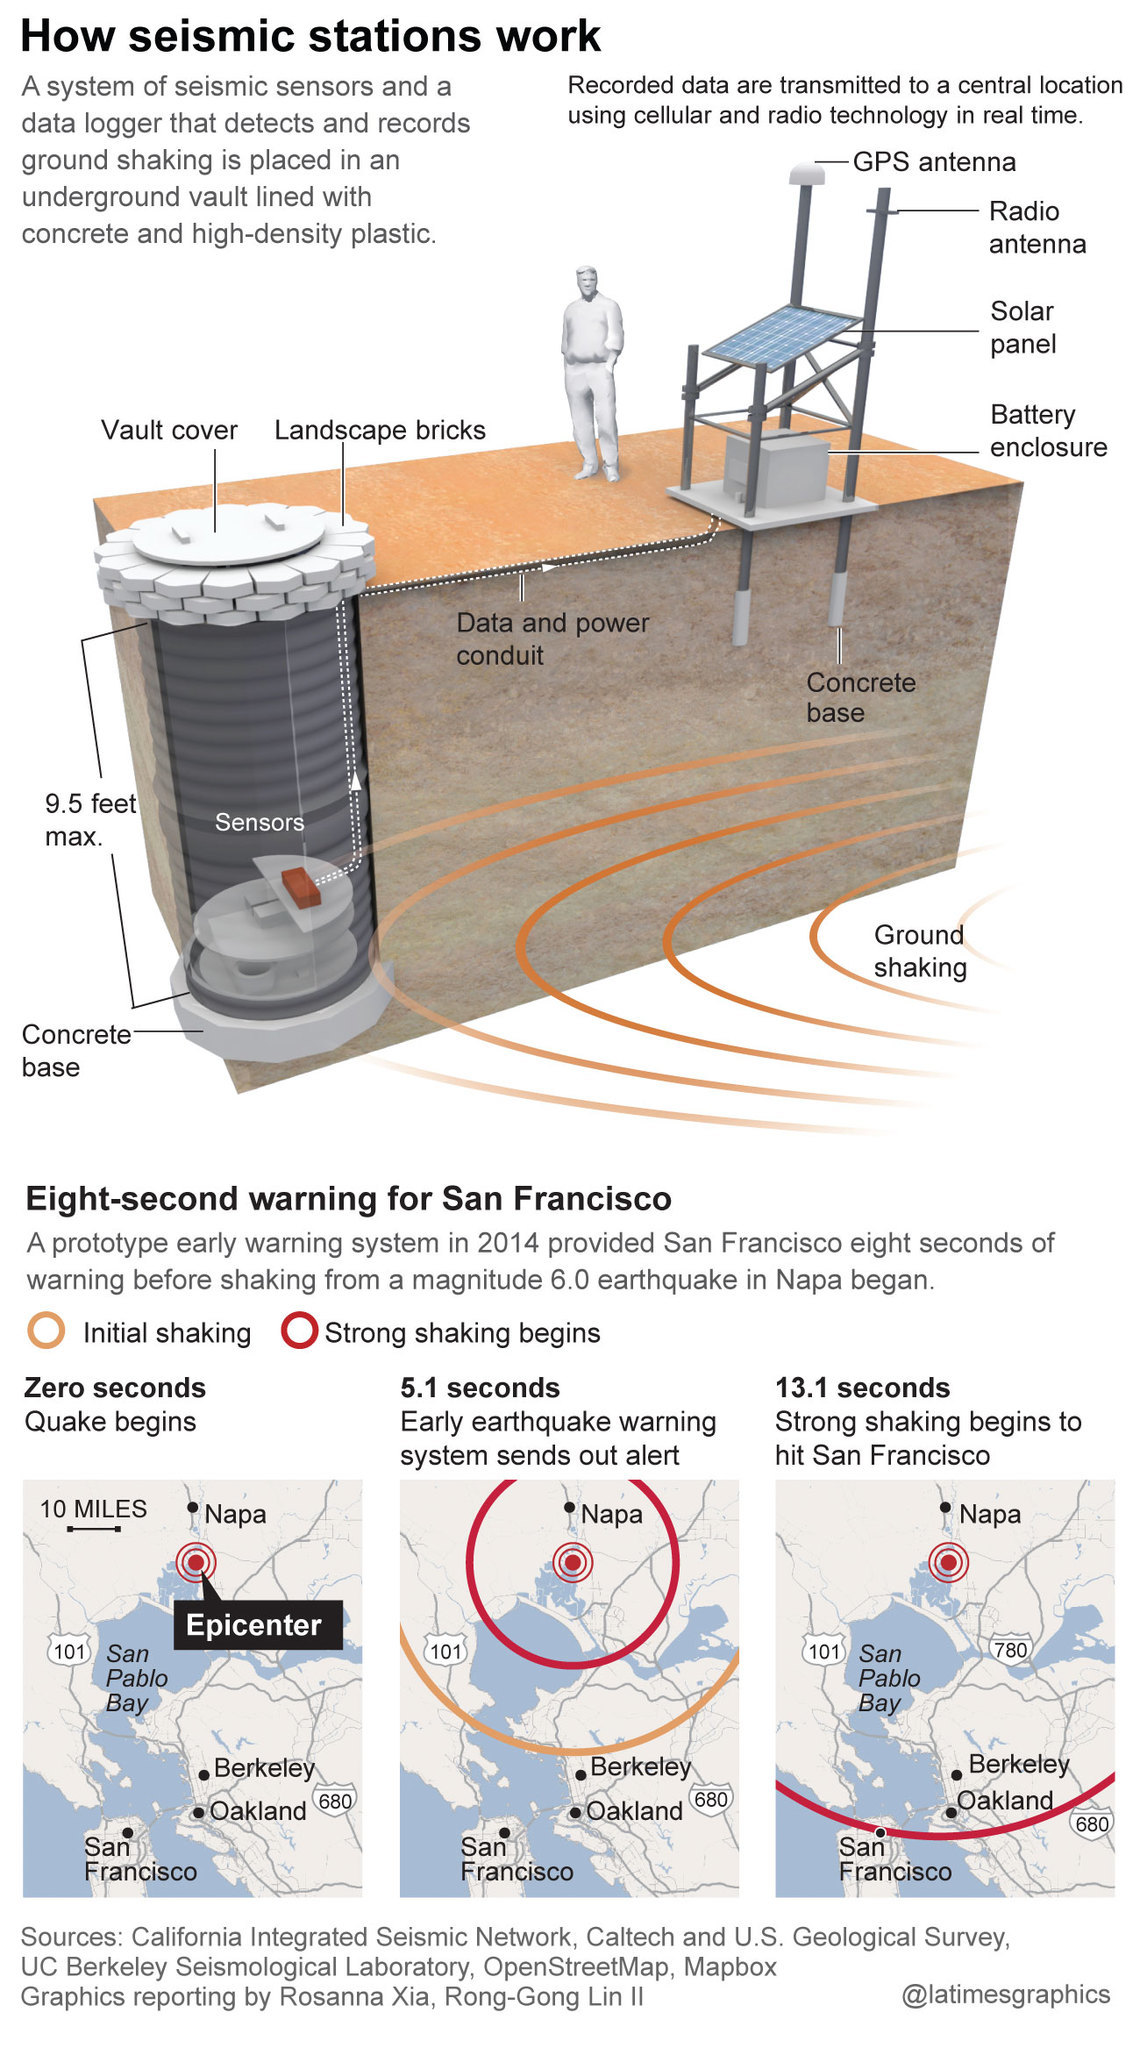 ‘Millions of lives at stake’ if California can’t save earthquake alert system ...1140 x 2048